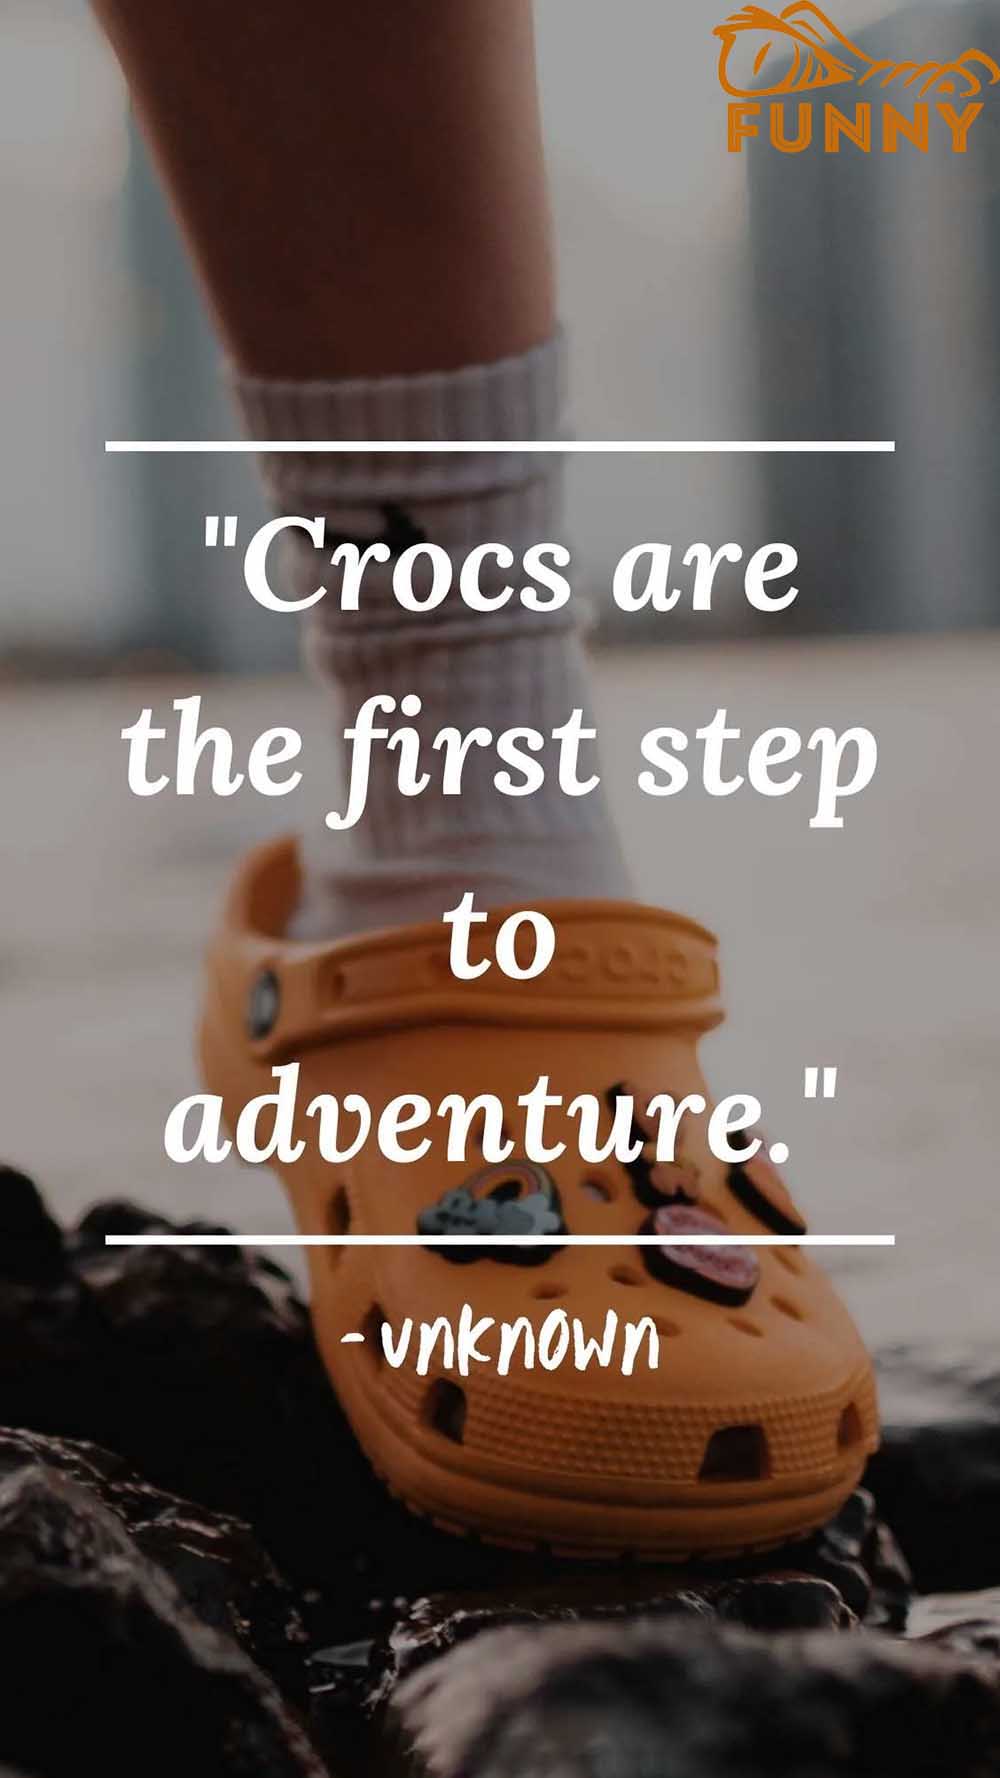 Crocs are the first step to adventure